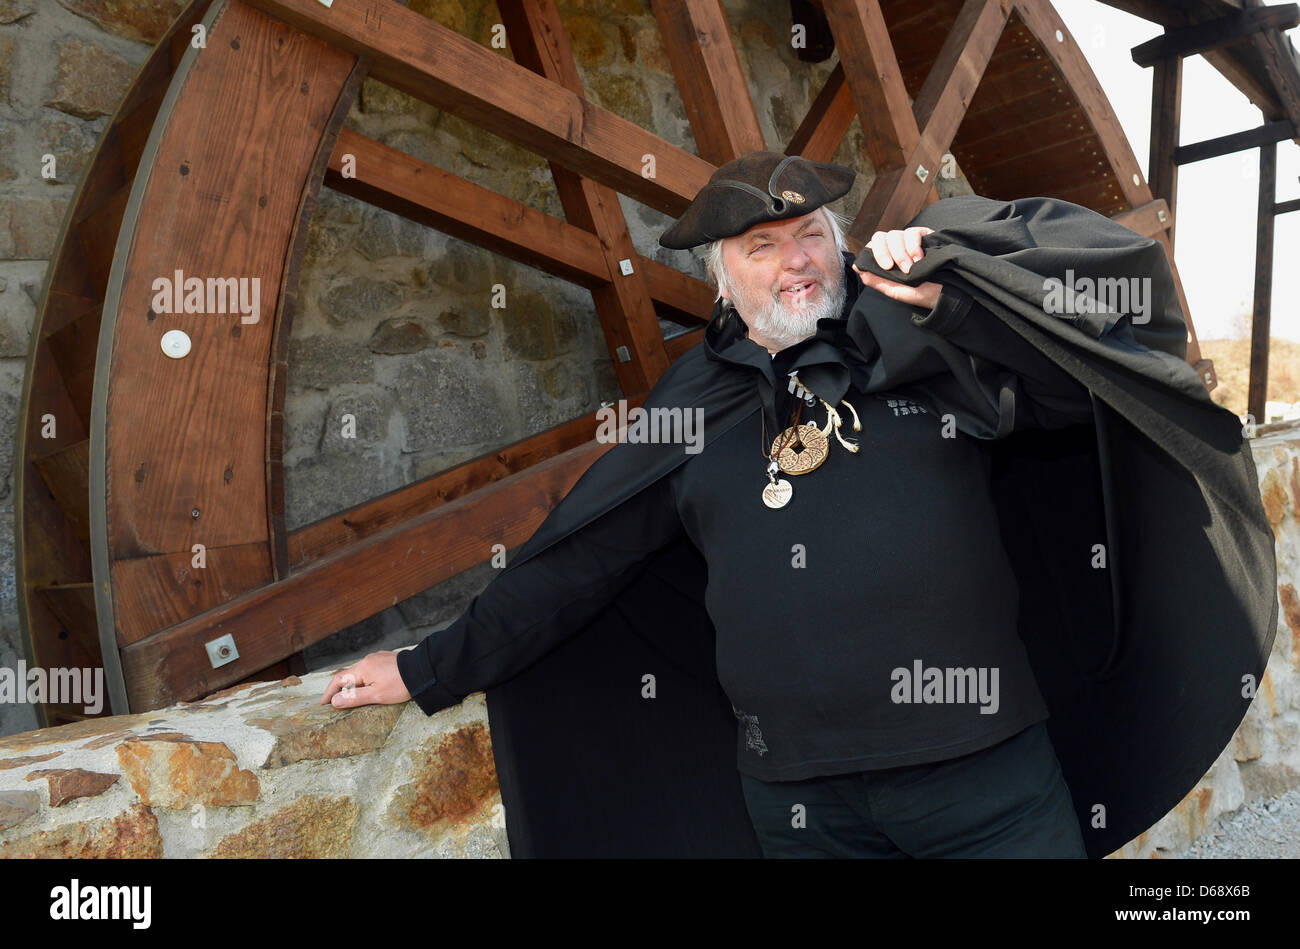 The black miller aka Dieter Klimek stands in front of the mill wheel at the Krabat adventure farm in the Hoyerswerda district Schwarzkollm, Germany, 28 March 2012.  Krabat is a German fantasy novel by Otfried Preussler first published in 1971. It is the basis of different films, such as The Sorcerer's Apprentice and the 2008 live-action film Krabat. Photo: Britta Pedersen Stock Photo